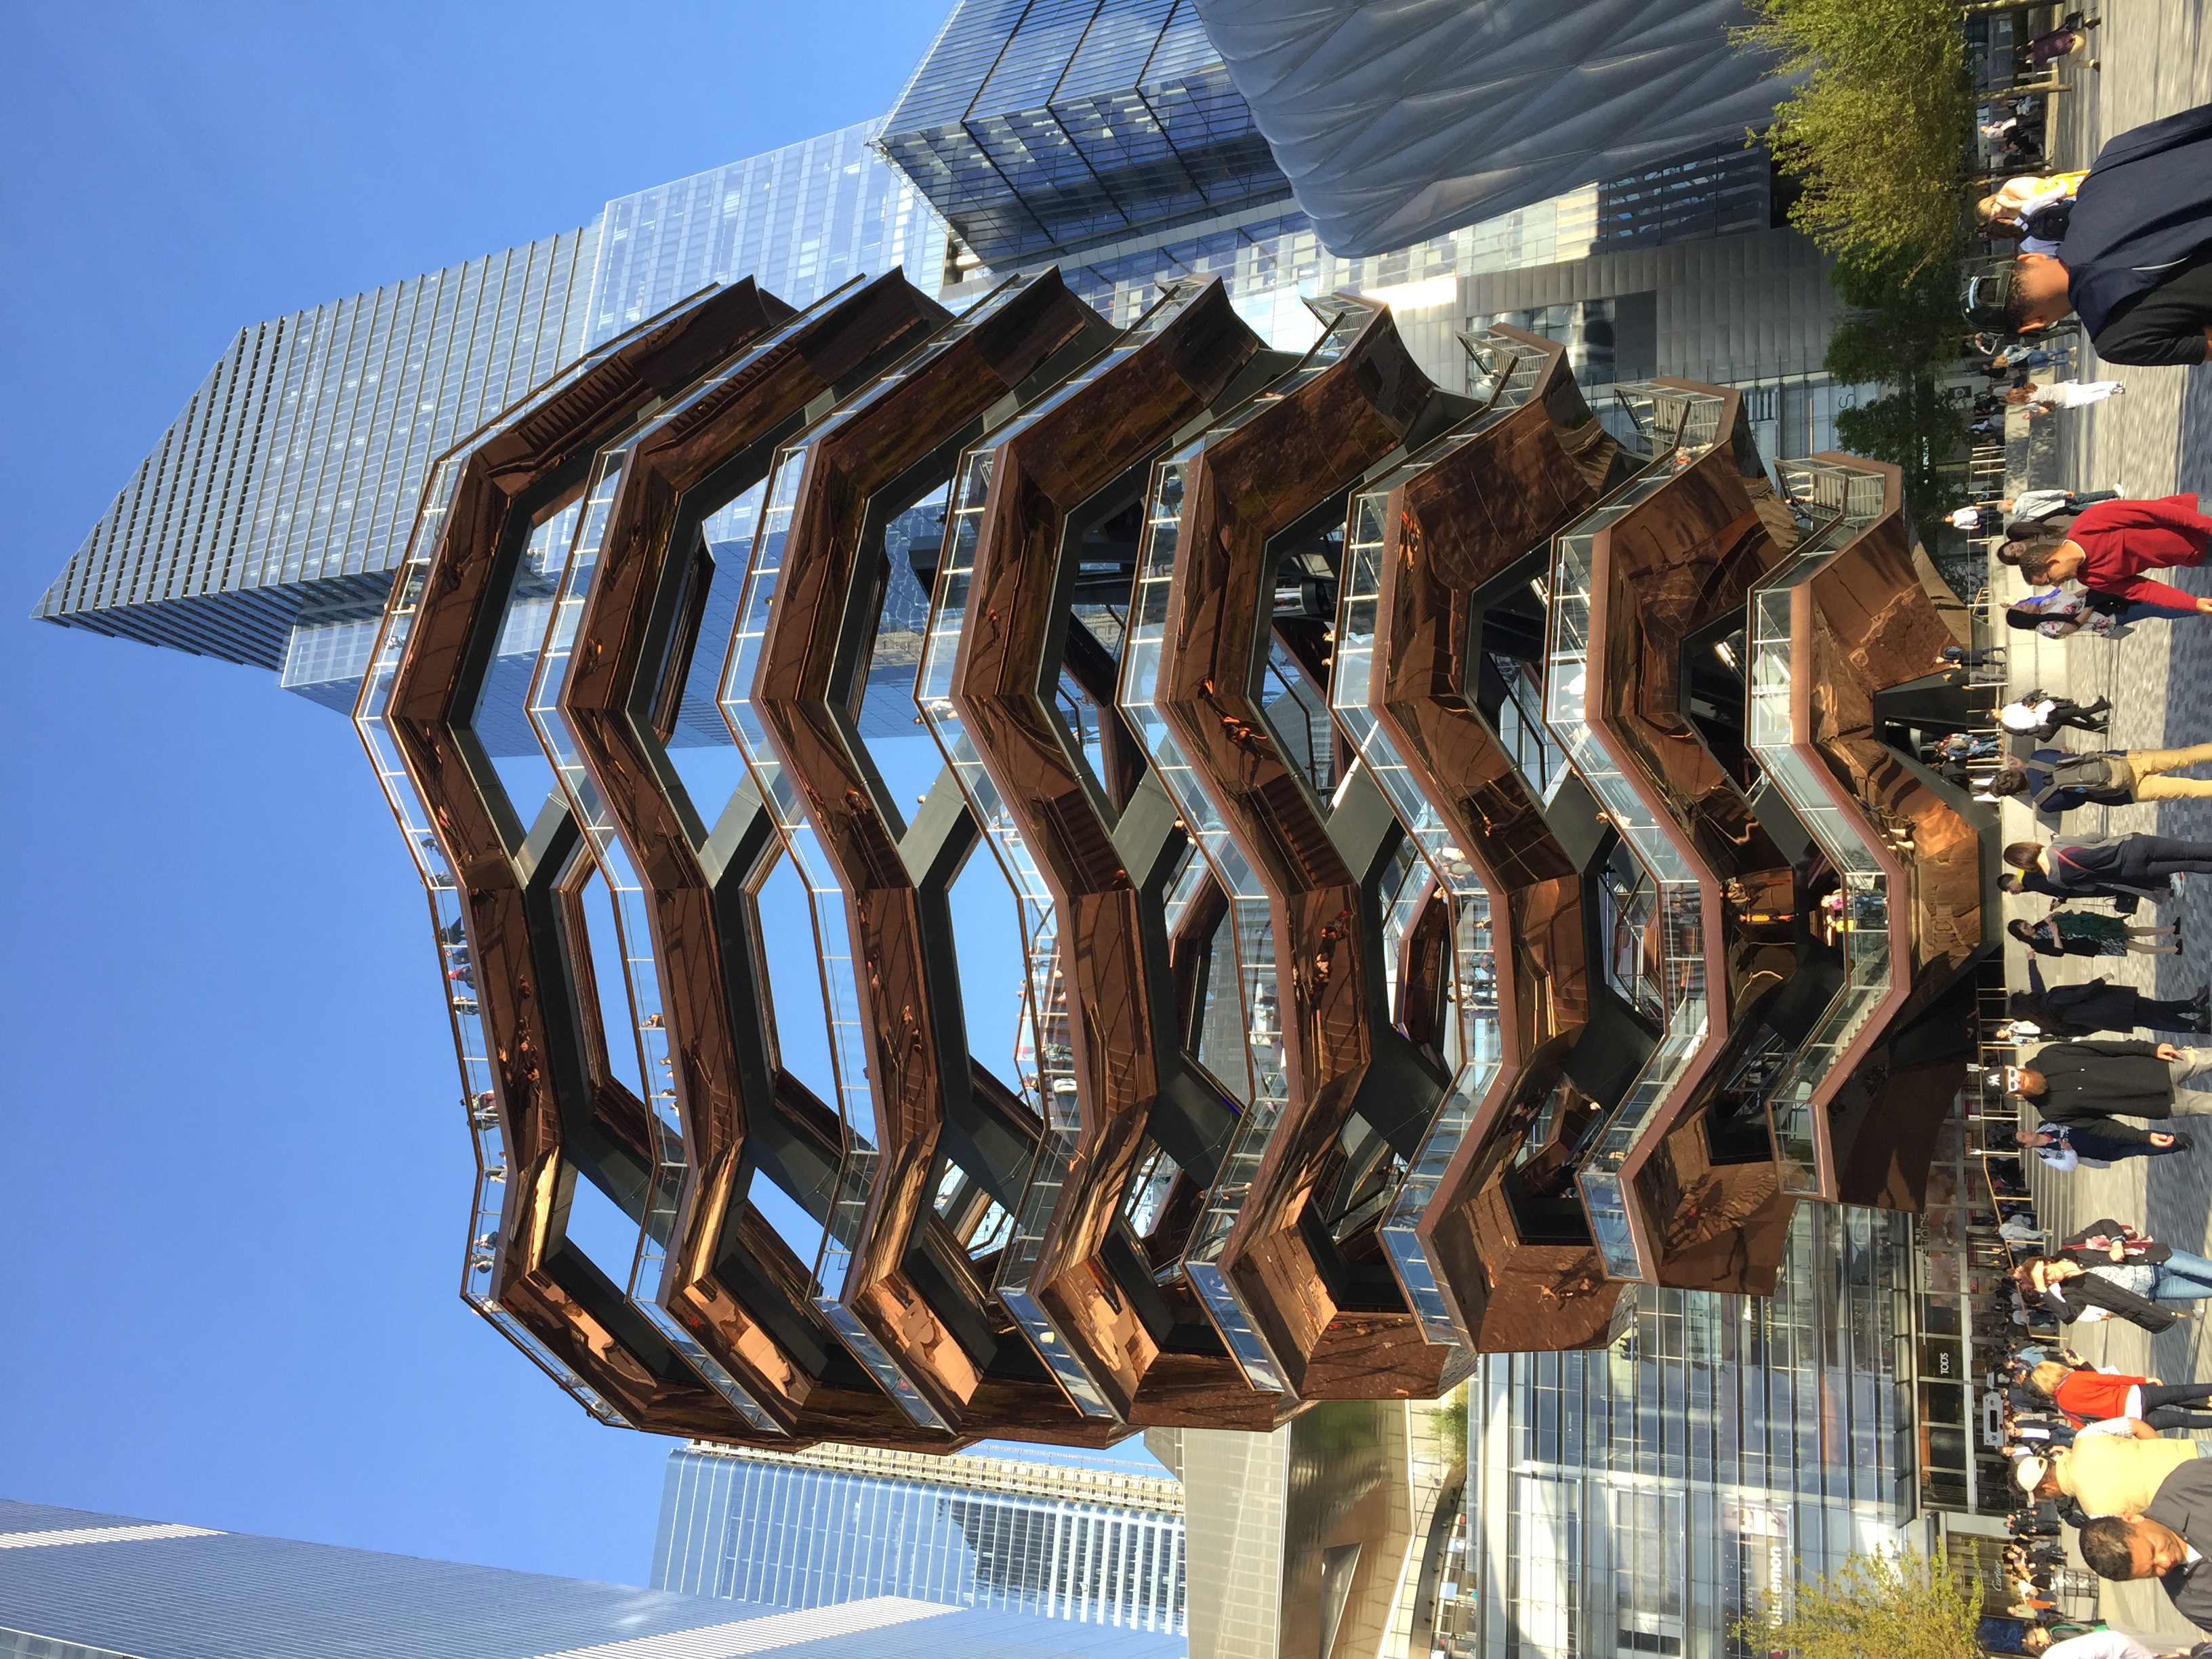 Image of the Vessel, an interactive artwork structure in New York City’s Hudson Yards